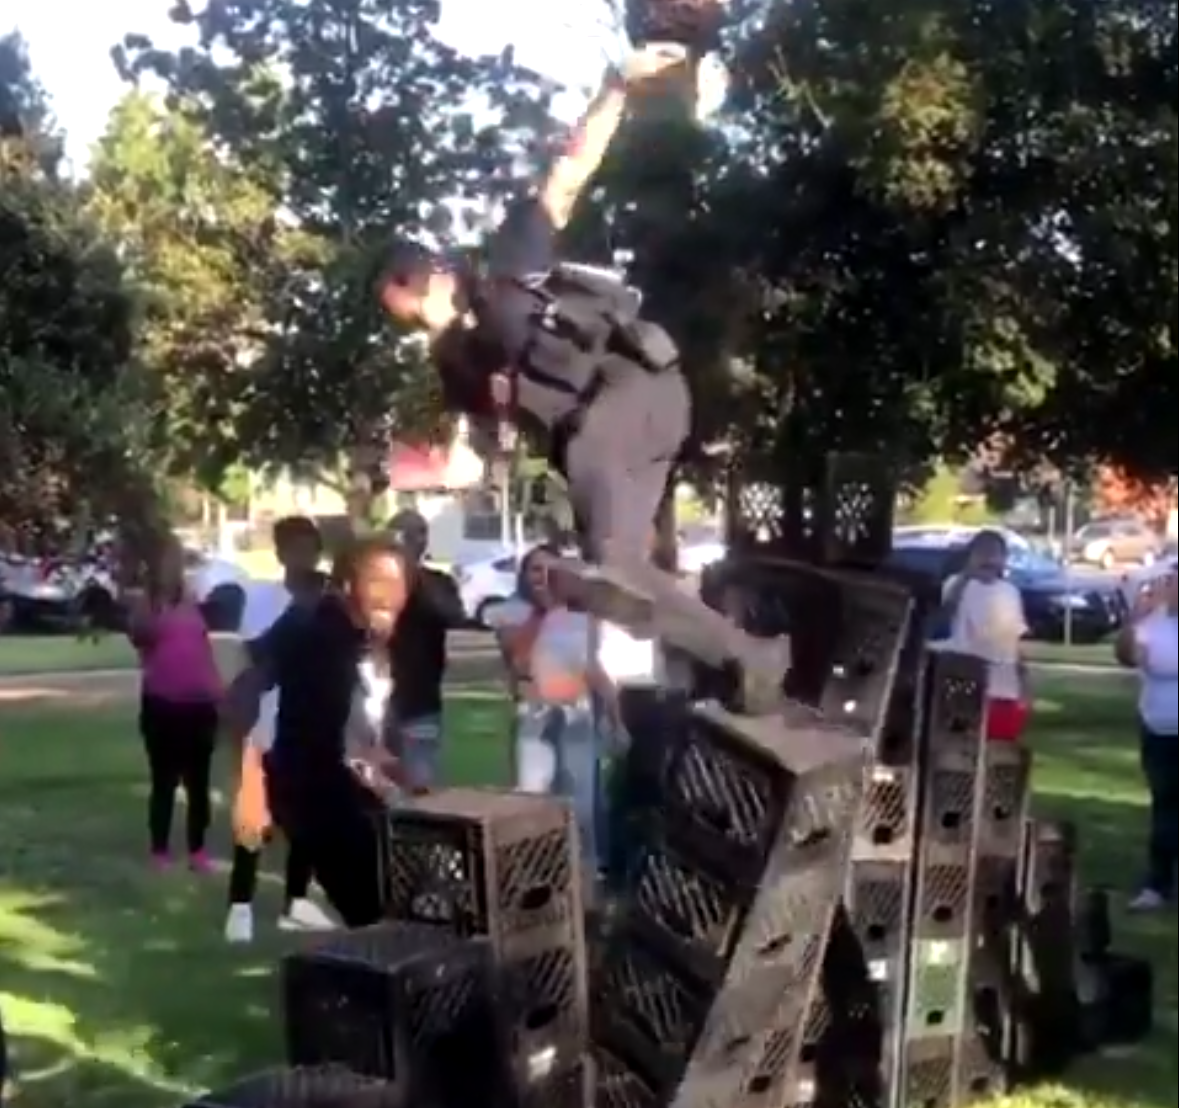 A screencap from a video circulating on Twitter of the Milk Crate Challenge. (Screenshot: Gizmodo/@Bryant_d_G, Fair Use)